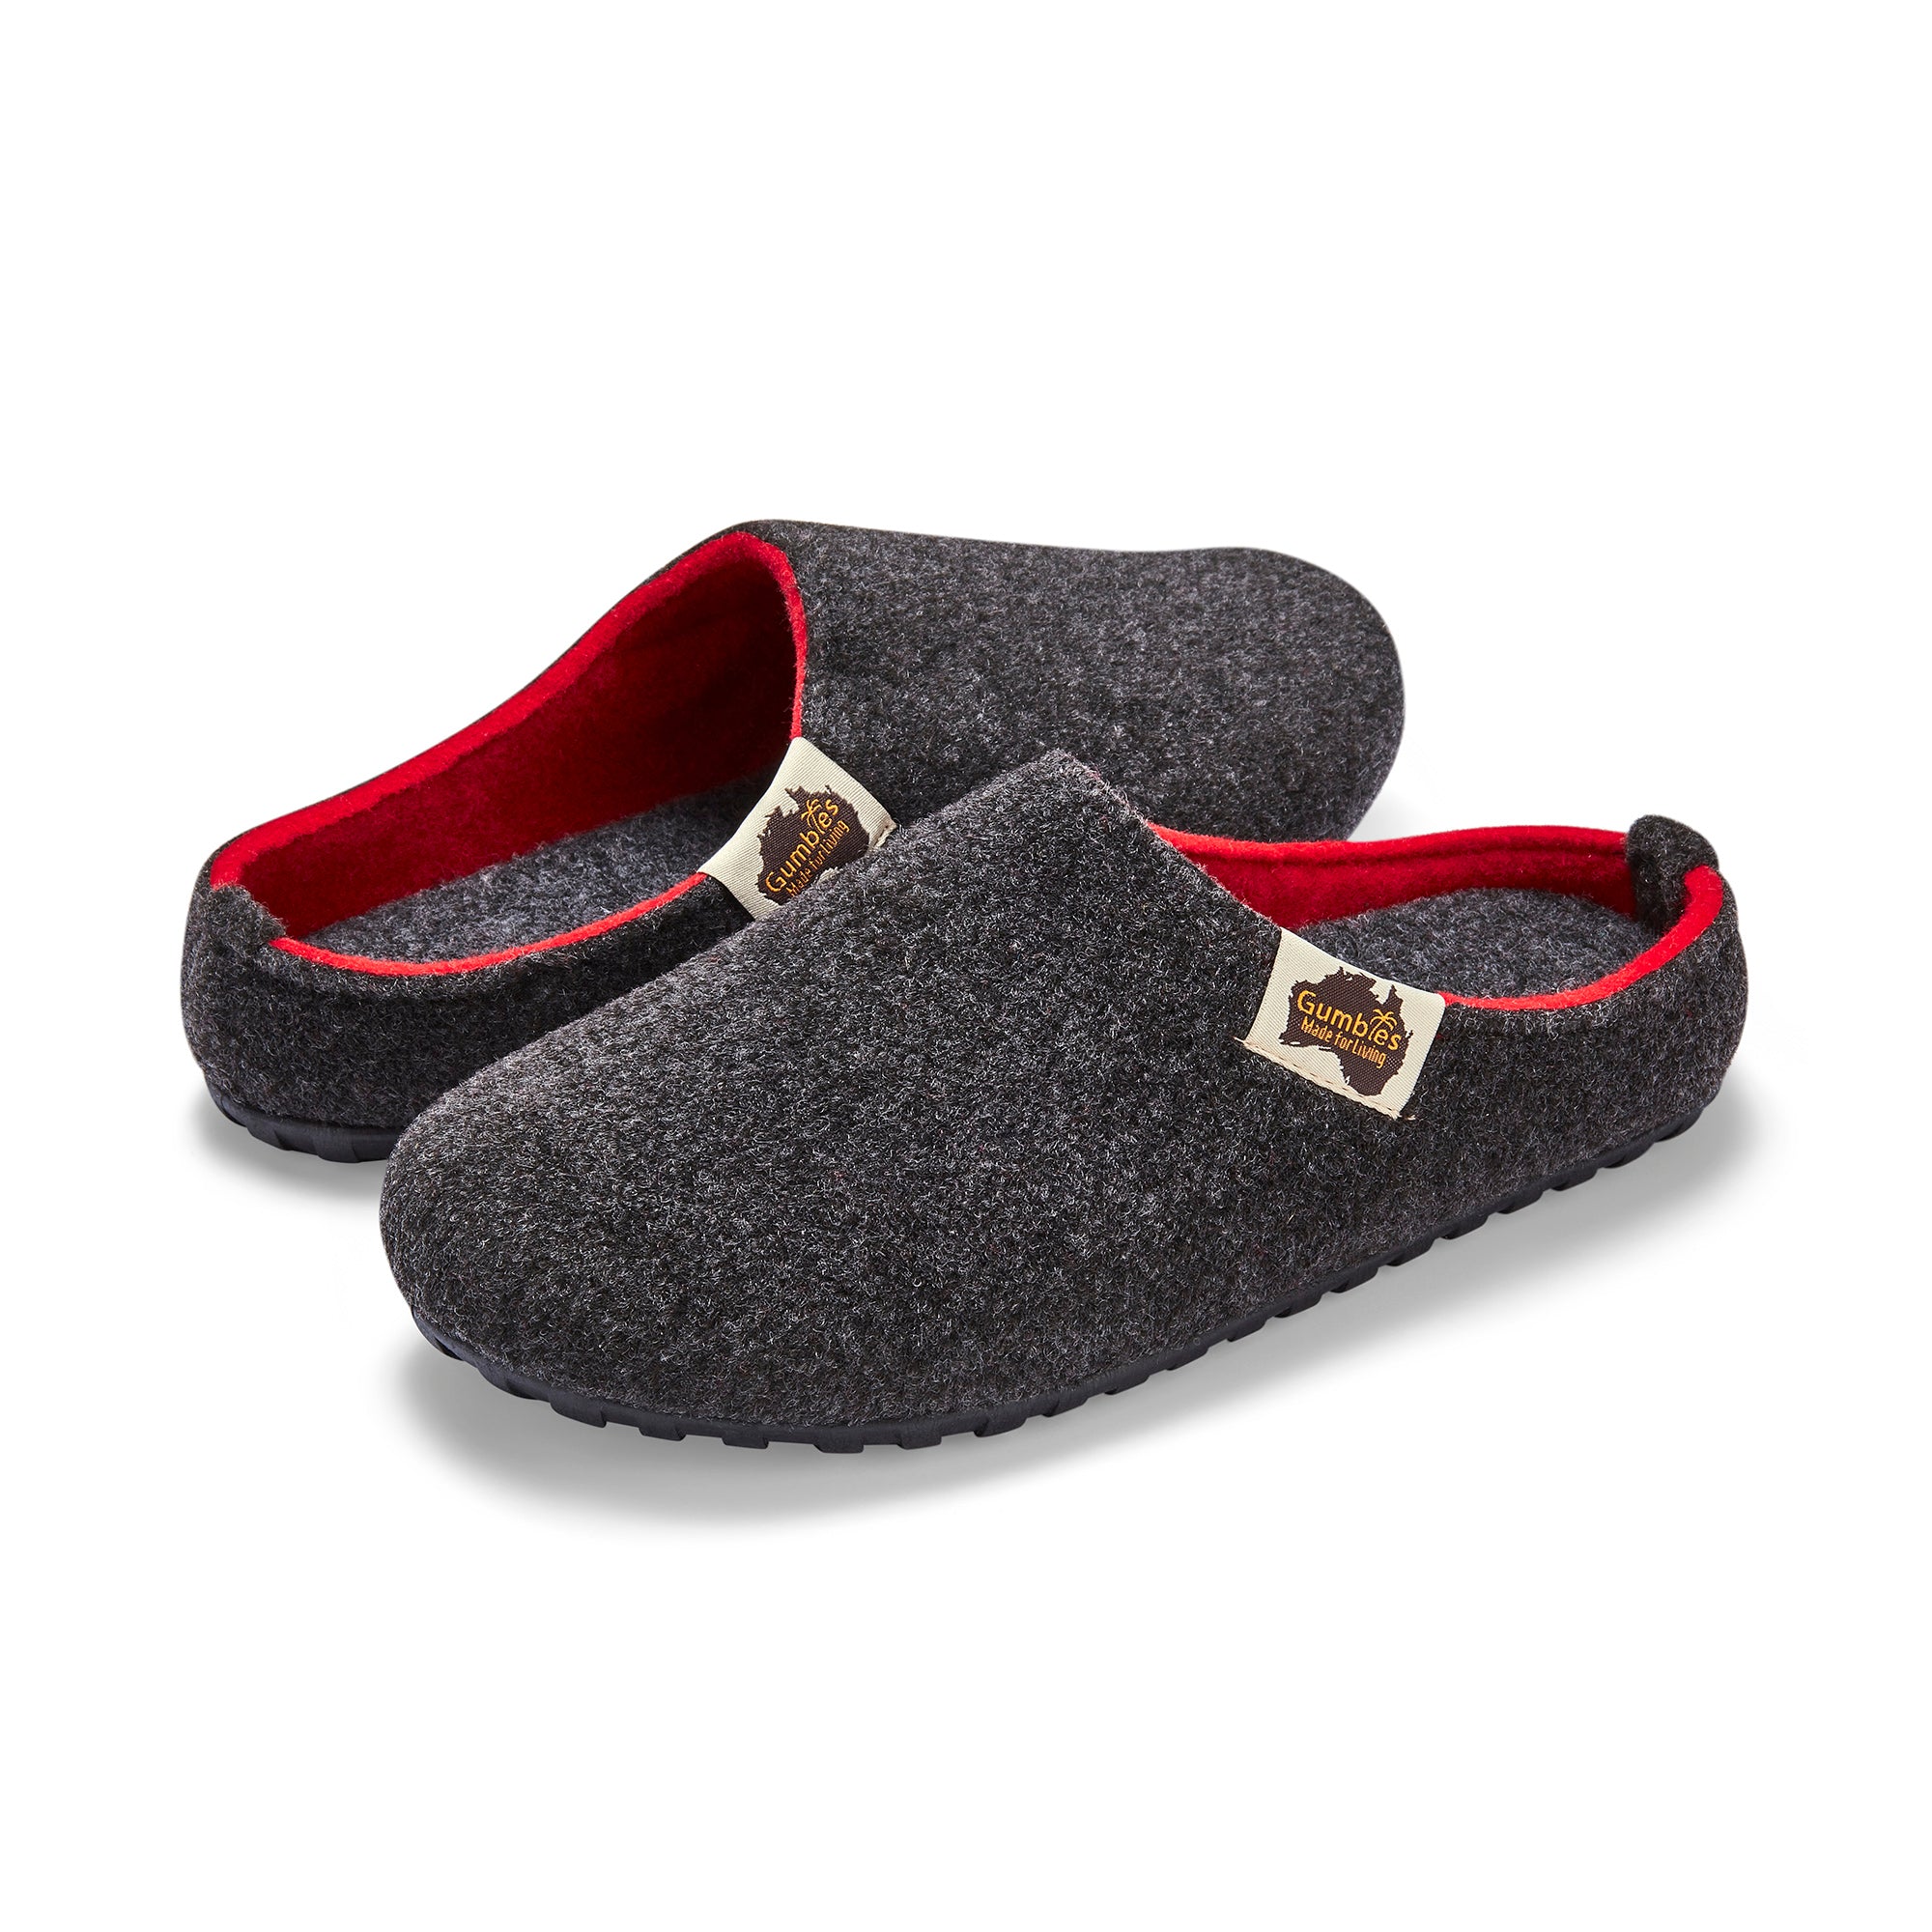 Outback Slippers - Men's - Charcoal & Red